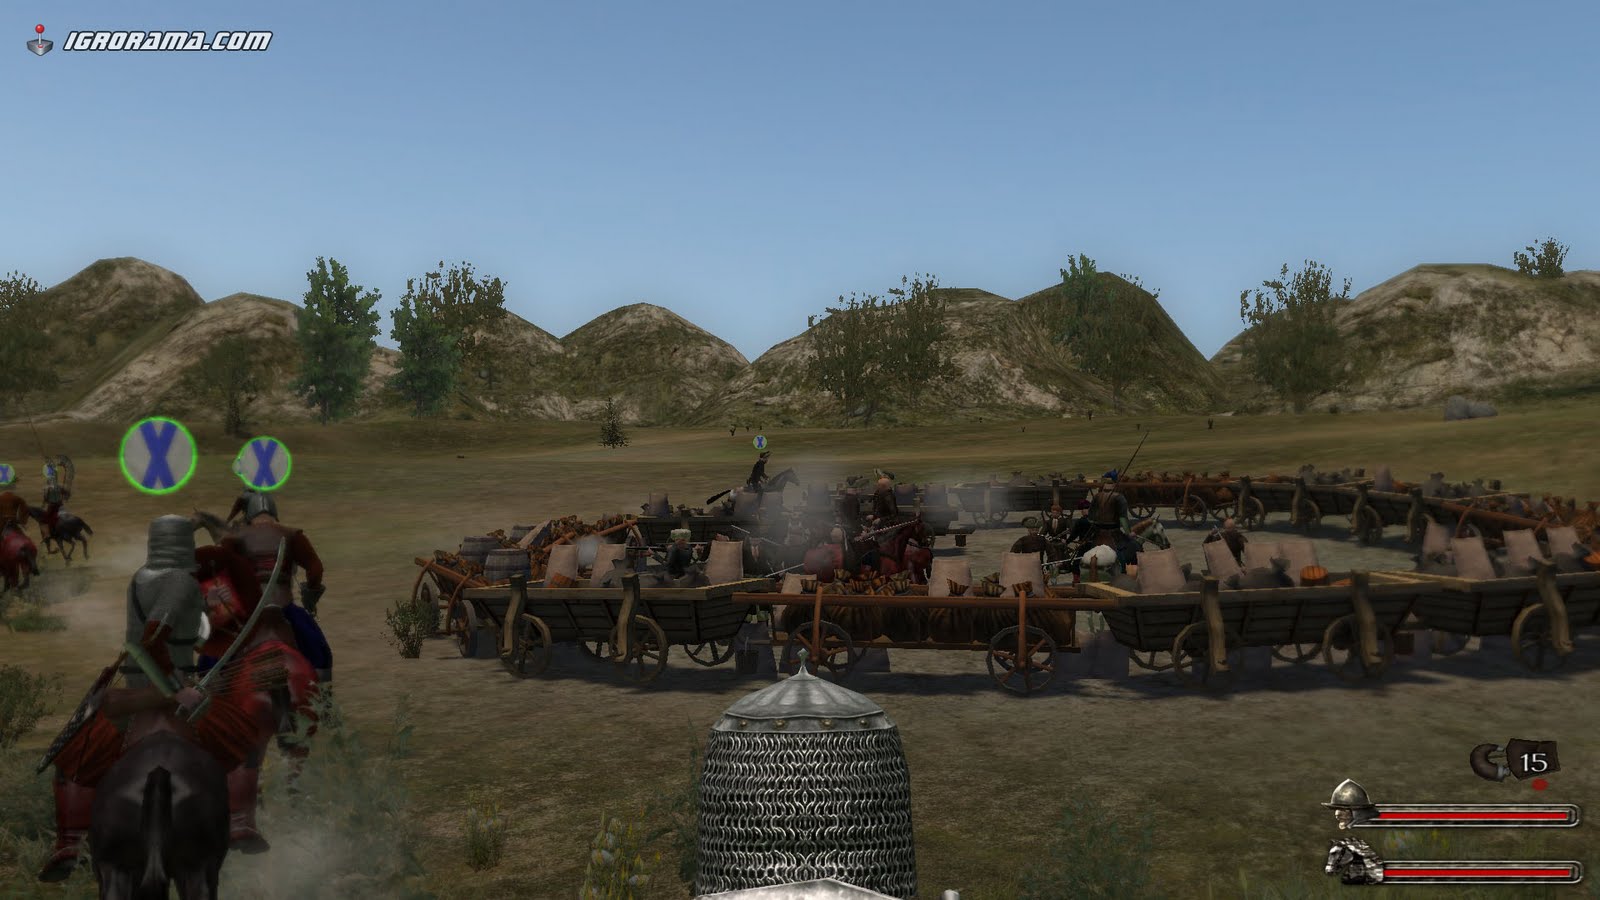 Русификатор для маунт блейд. Mount and Blade with Fire and Sword. Mount&Blade with Fire and Sword kot. Мушкетер из Mount and Blade Warband Fire and Sword. Mount and Blade with Fire and Sword чит коды.